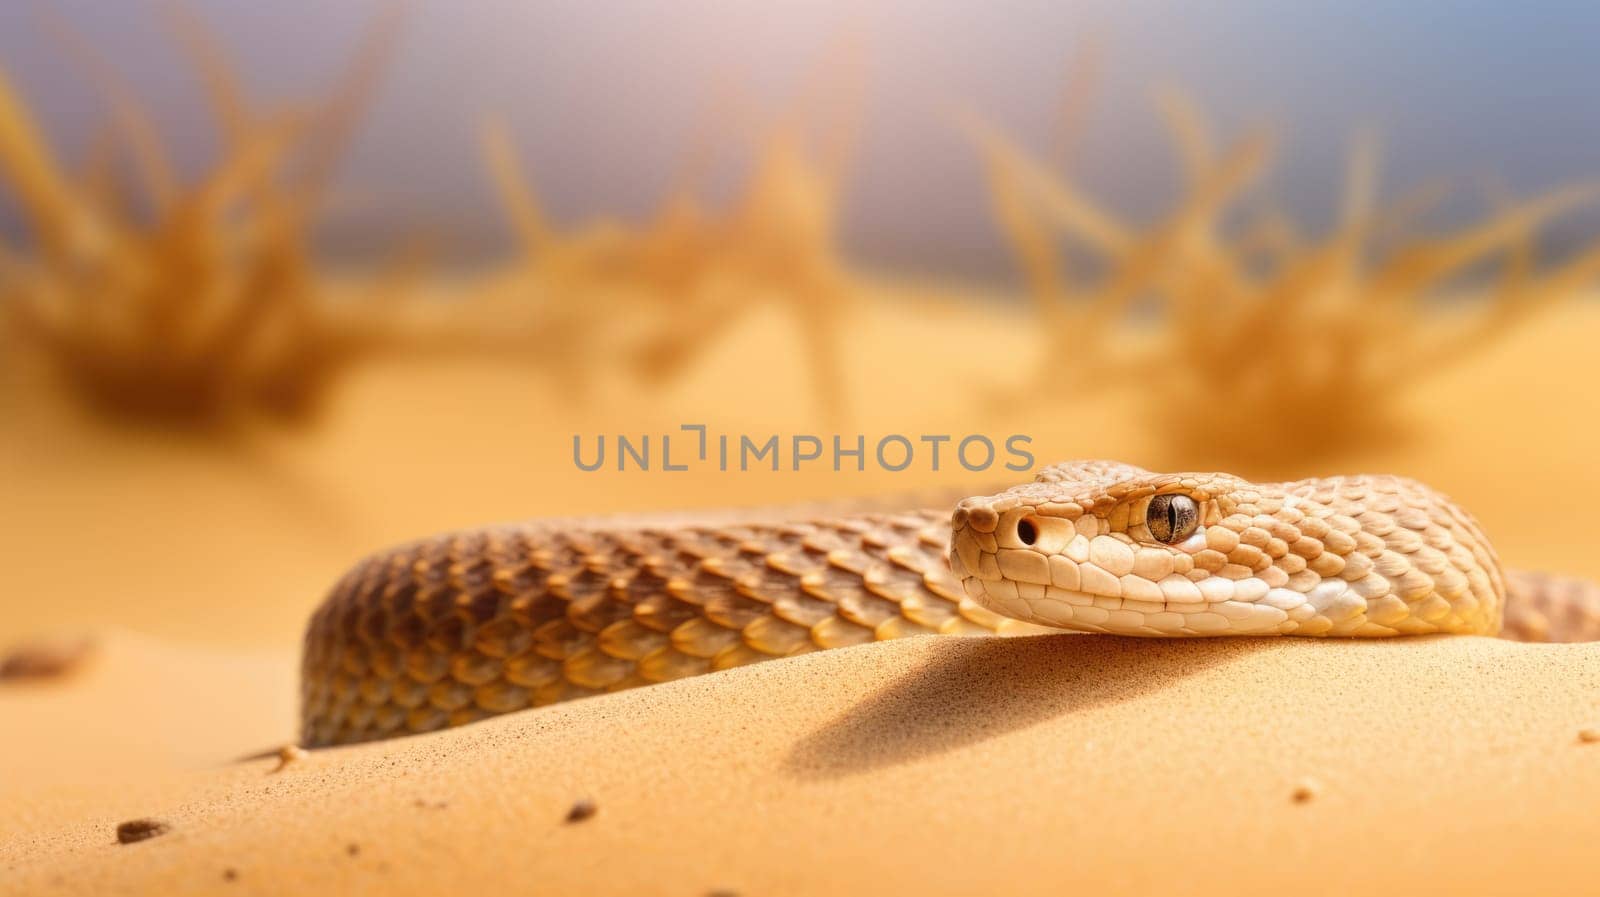 Close-up detail of the head of a Rattlesnake in desert on blurred background by natali_brill